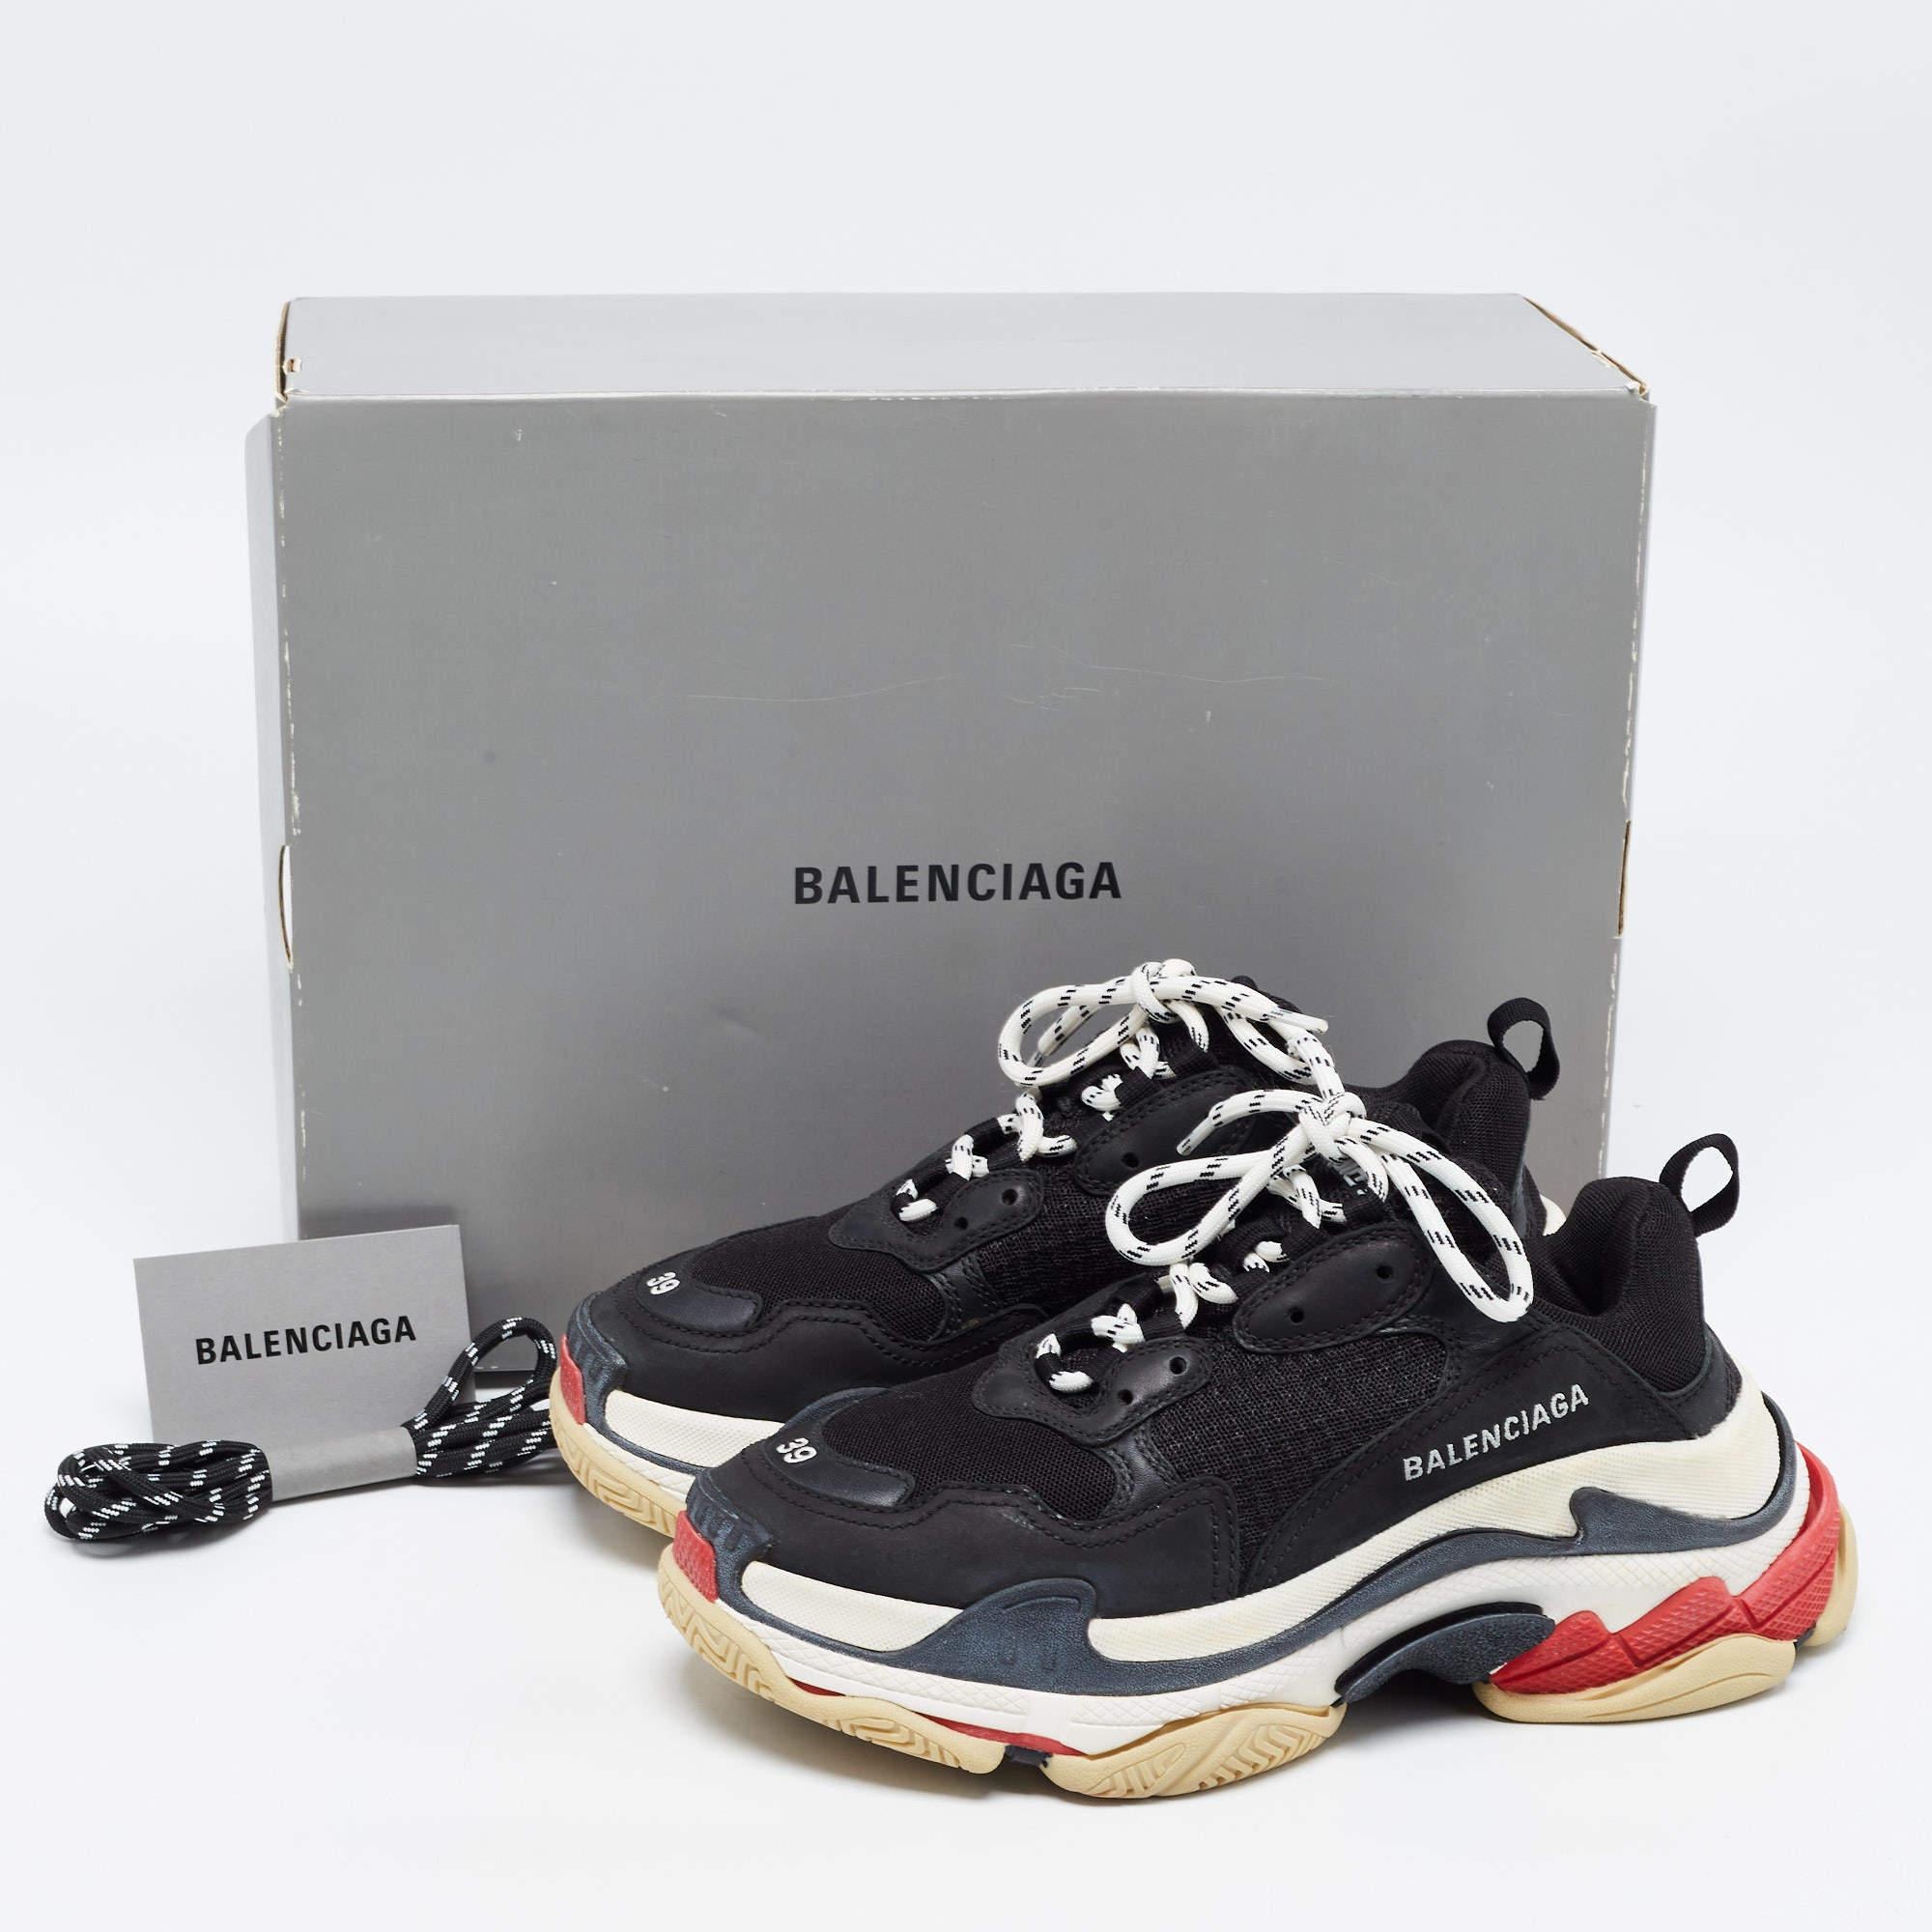 Balenciaga Black Mesh and Leather Triple S Sneakers Size 39 2